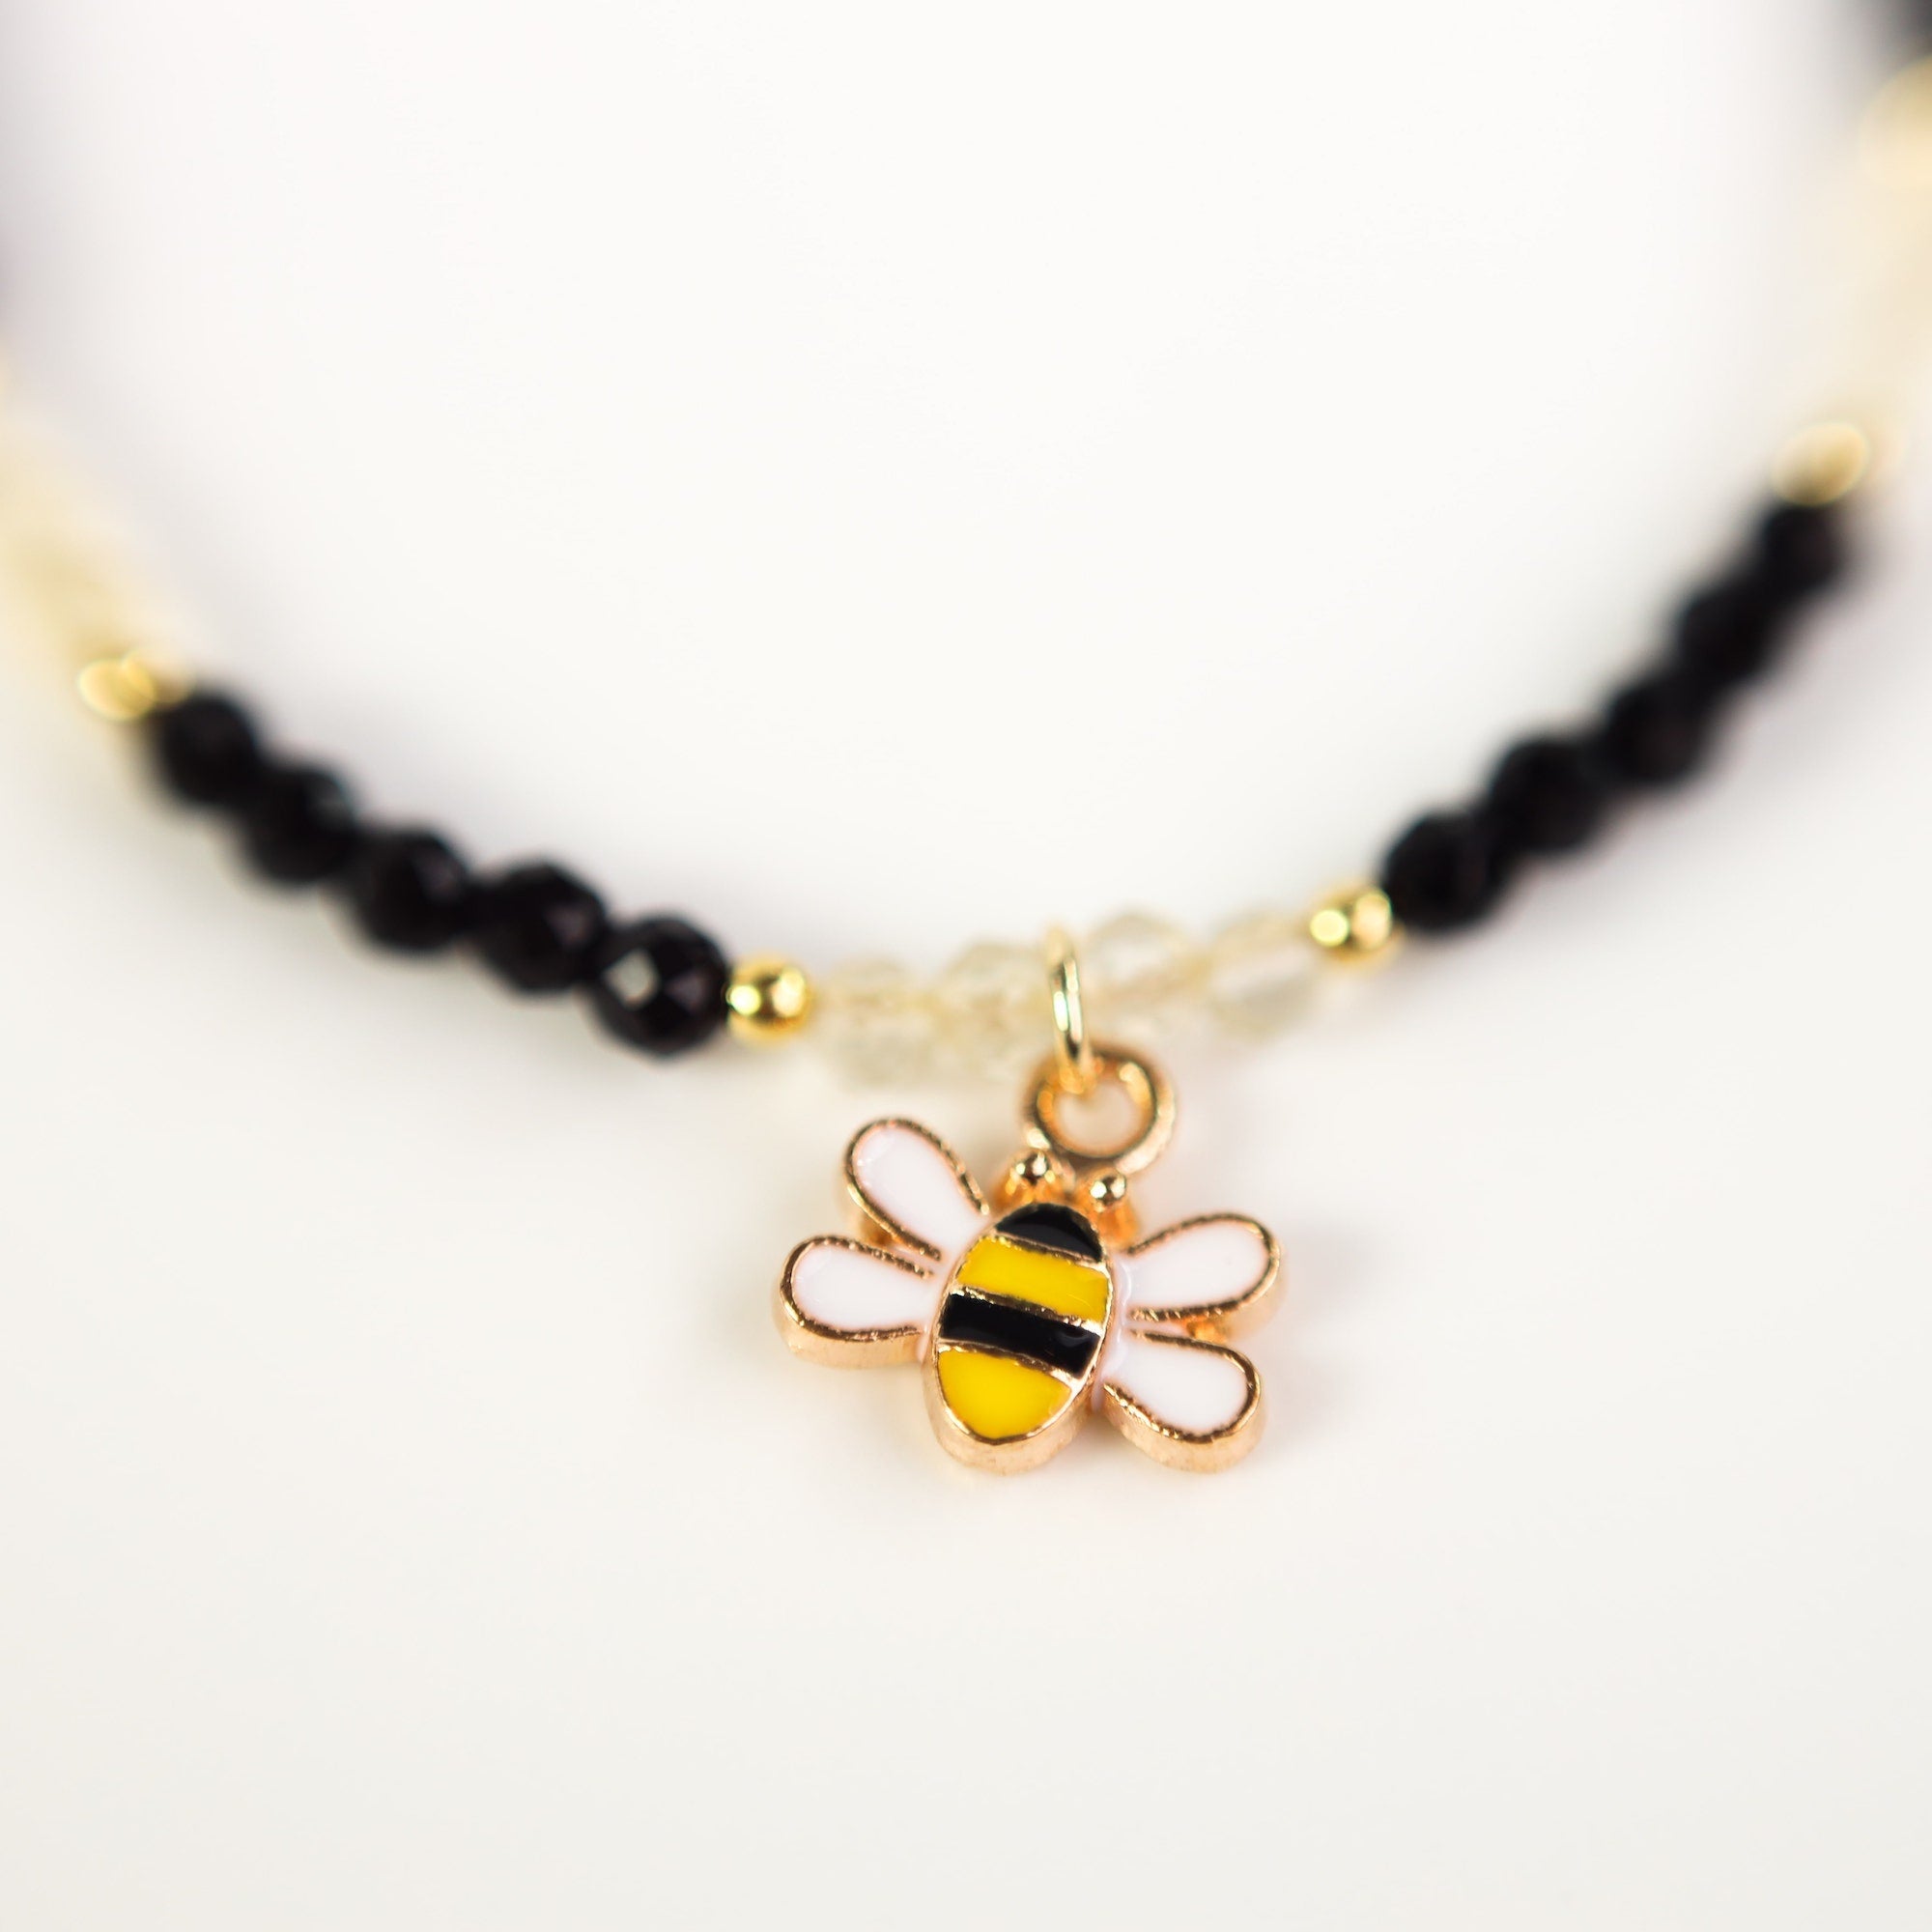 Hair Jewelry Accessories Silver Beaded Bee Charms Yellow Black Handmade  Accessories Set of 9 Black Owned